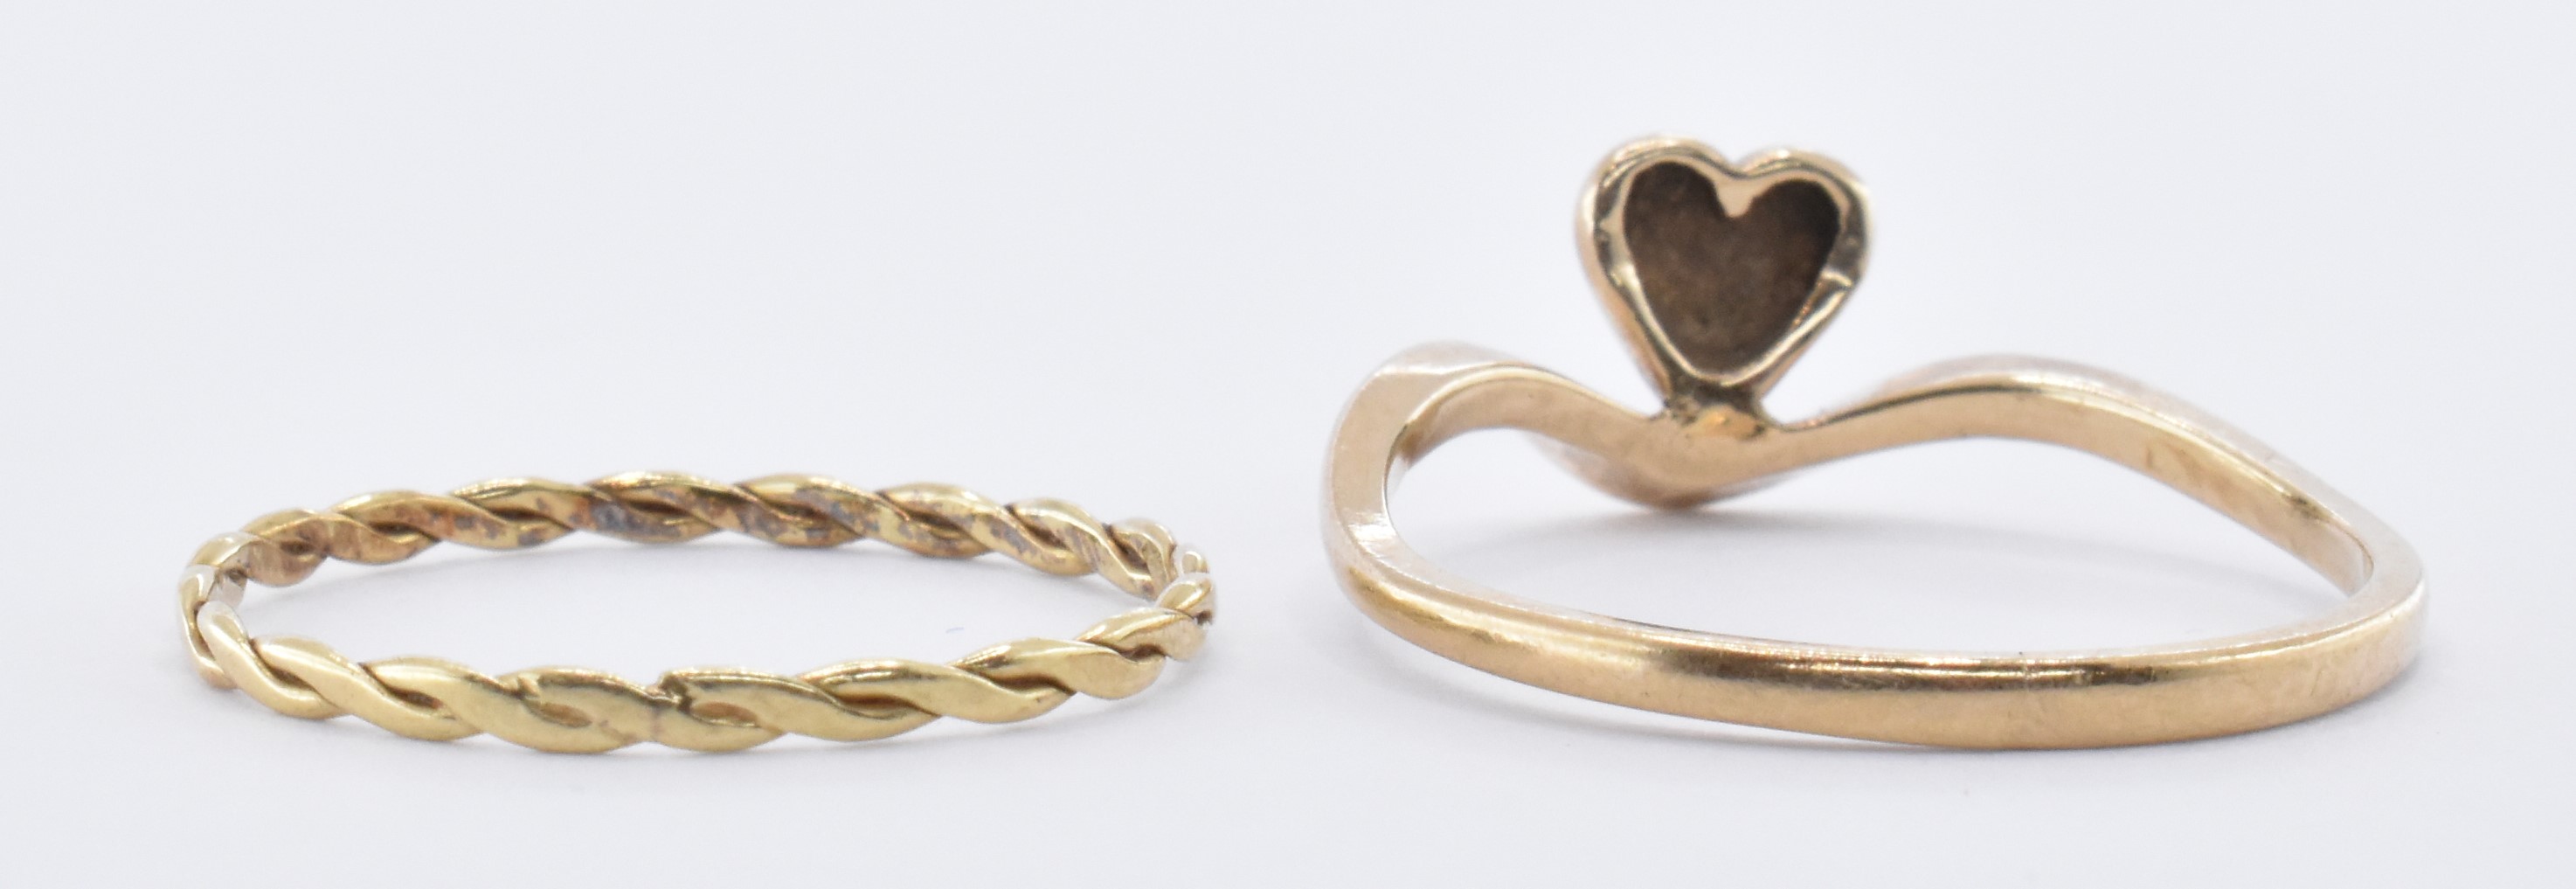 9CT GOLD HEART RING & 14CT GOLD ROPE TWIST RING - Image 4 of 7